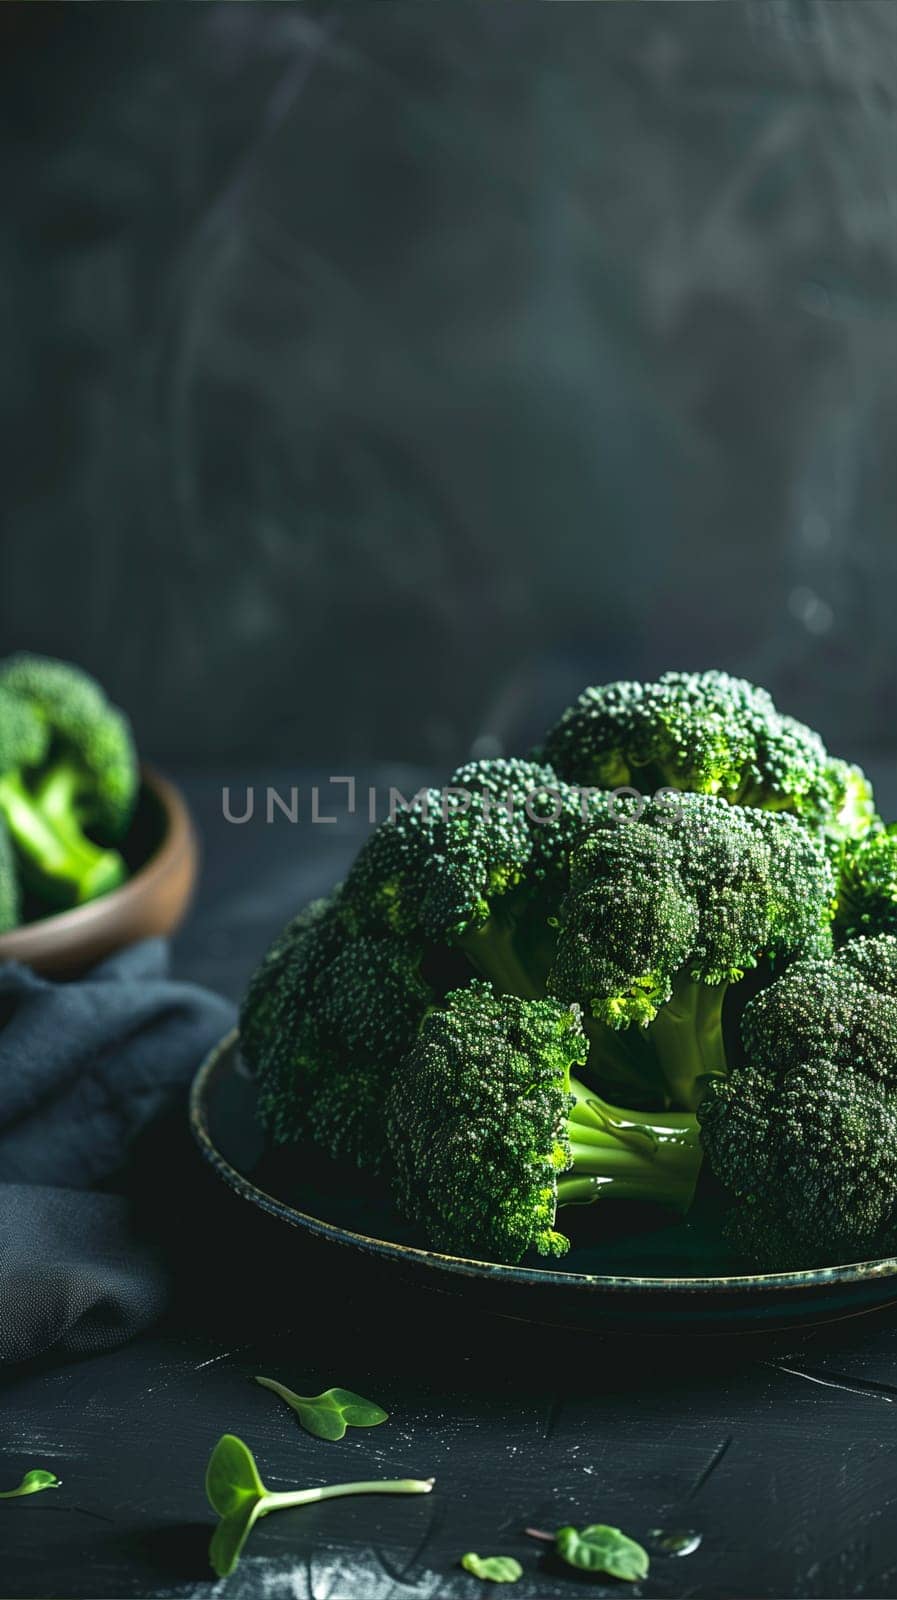 A plate of broccoli and a bowl of broccoli neatly arranged on a wooden table. Raw and fresh broccoli heads ready for cooking or serving.